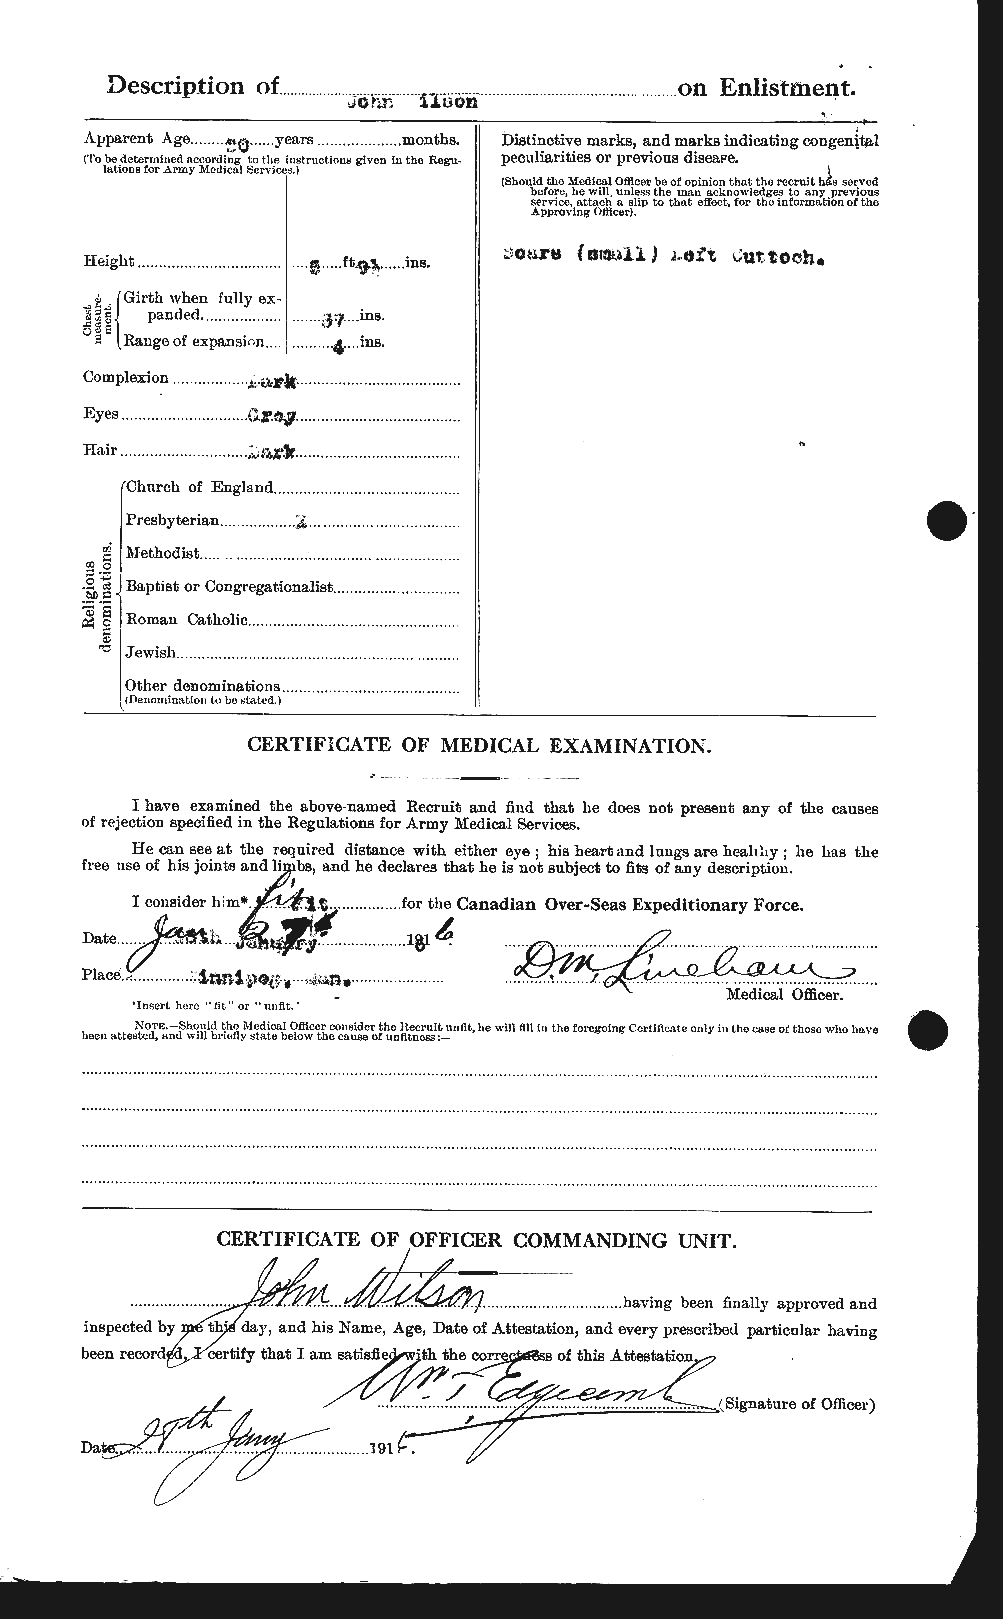 Personnel Records of the First World War - CEF 681625b